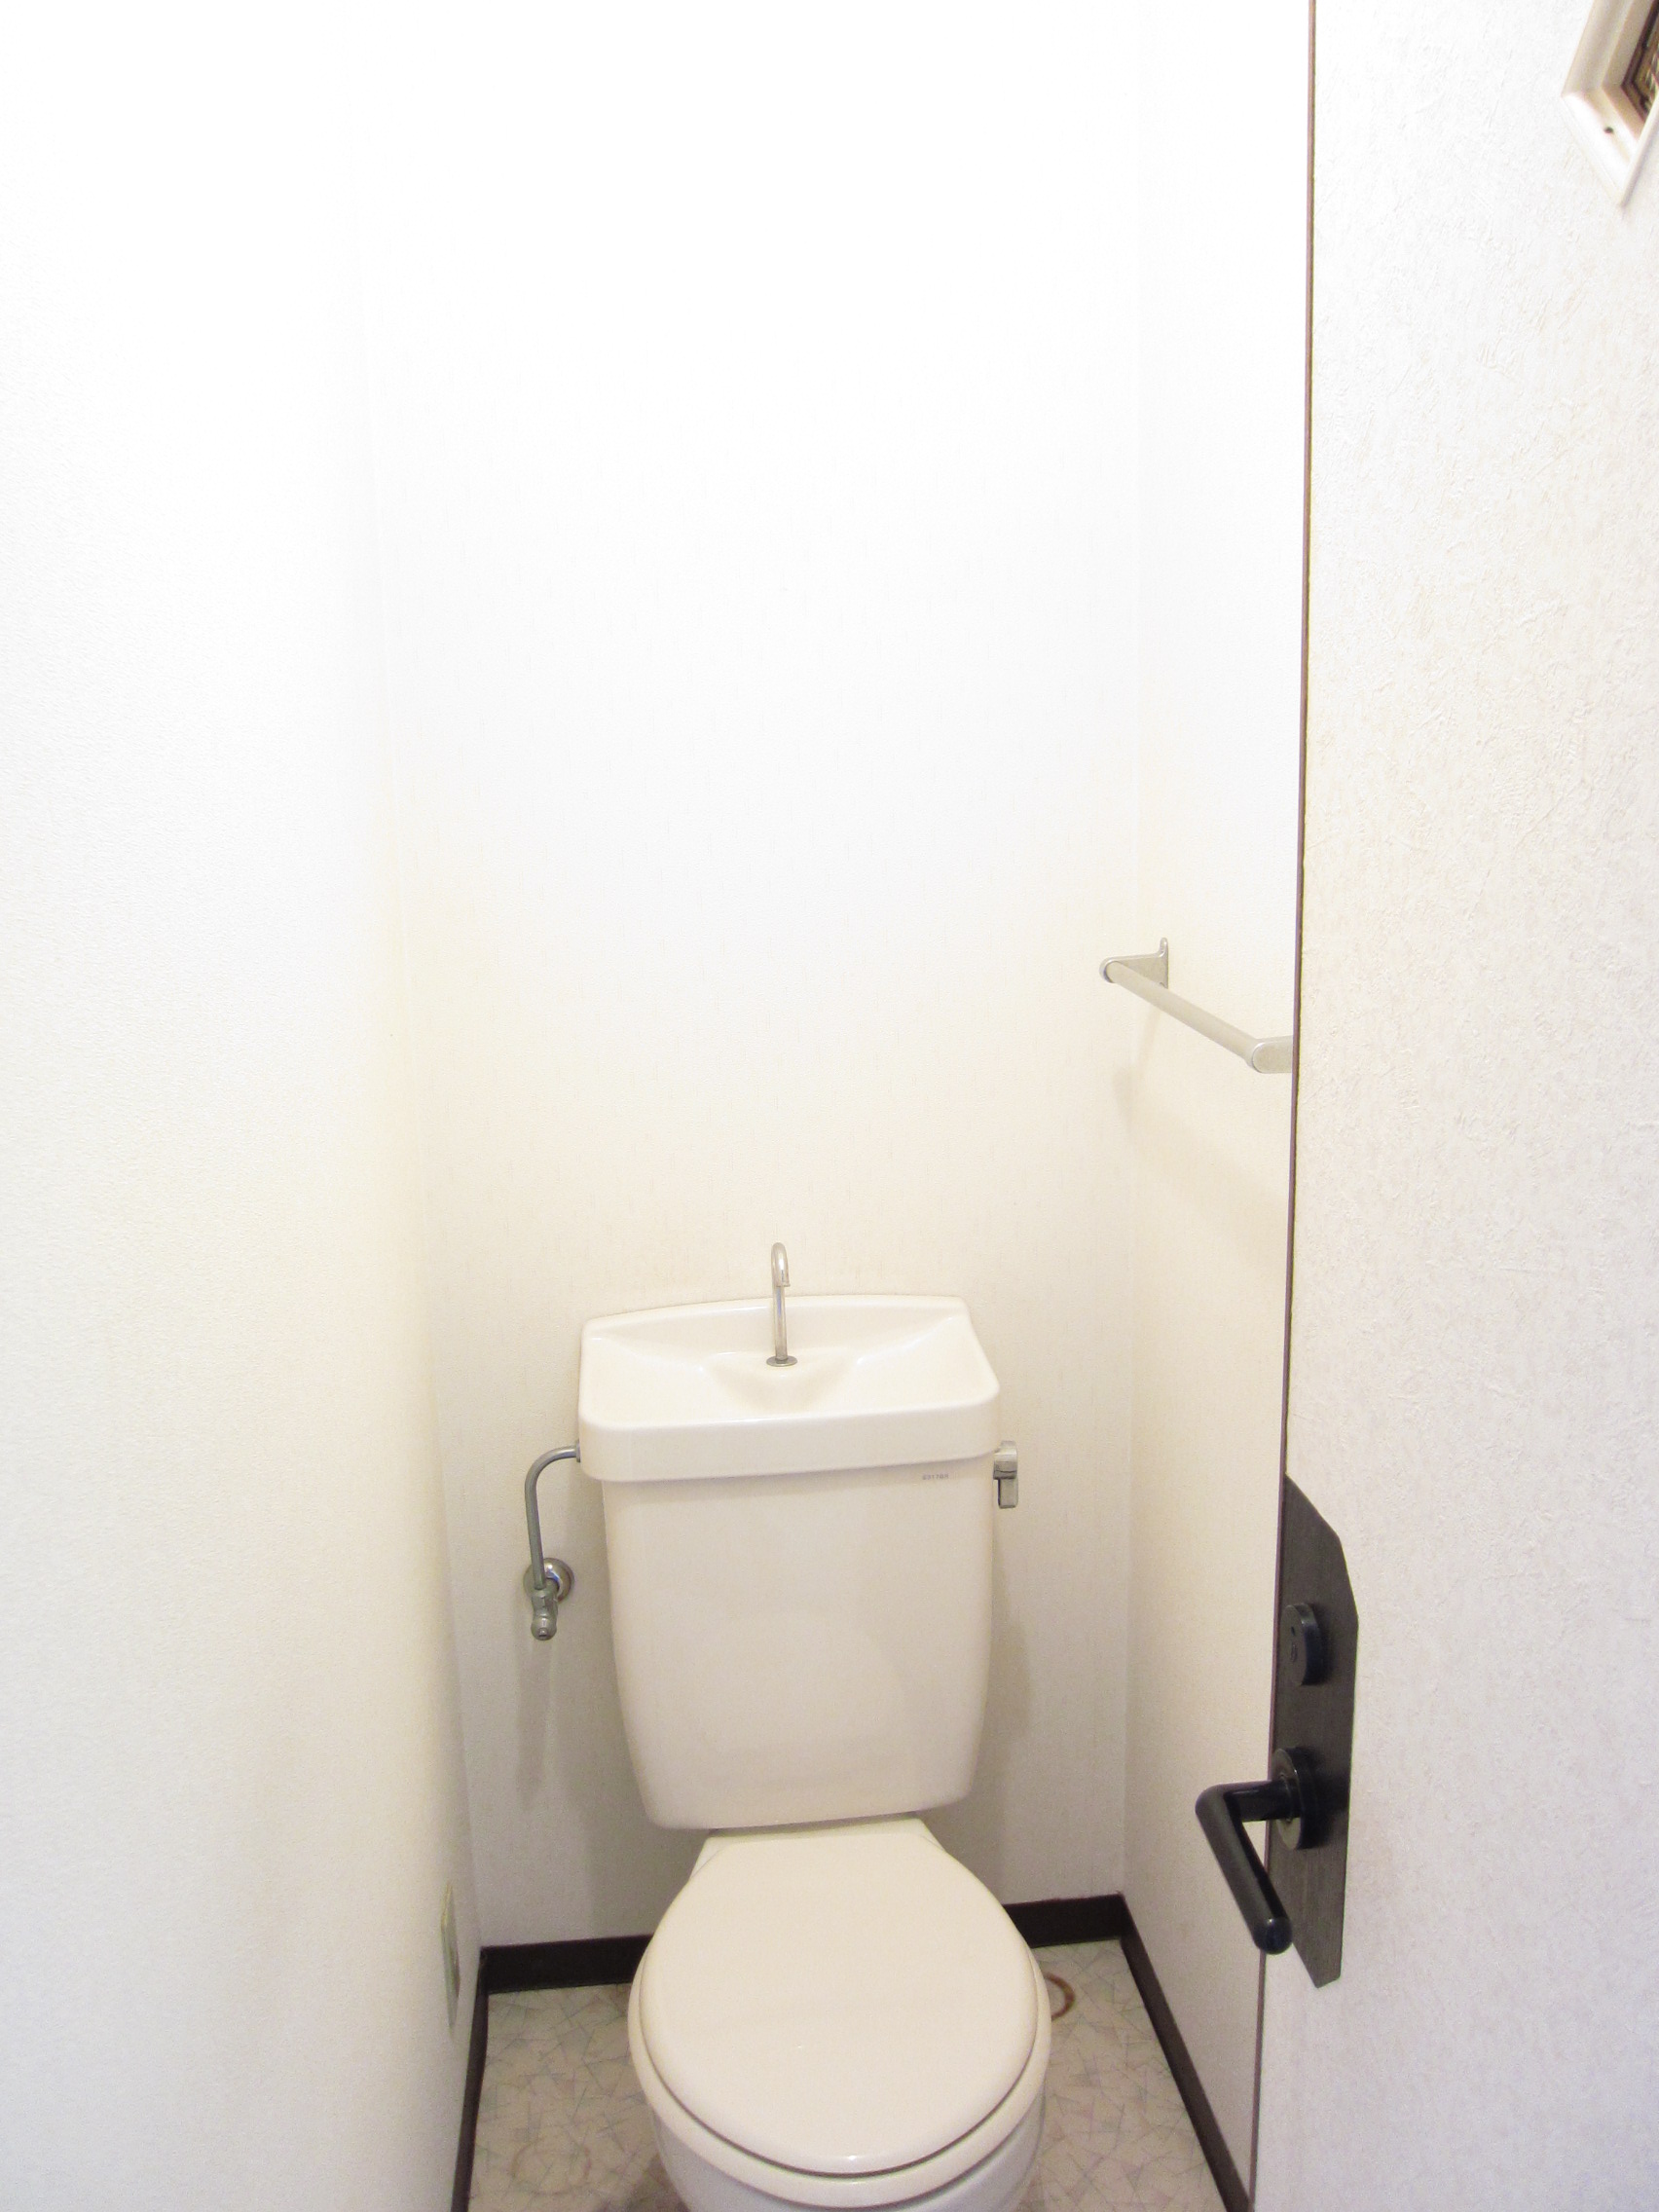 Toilet. This is also a simple type.